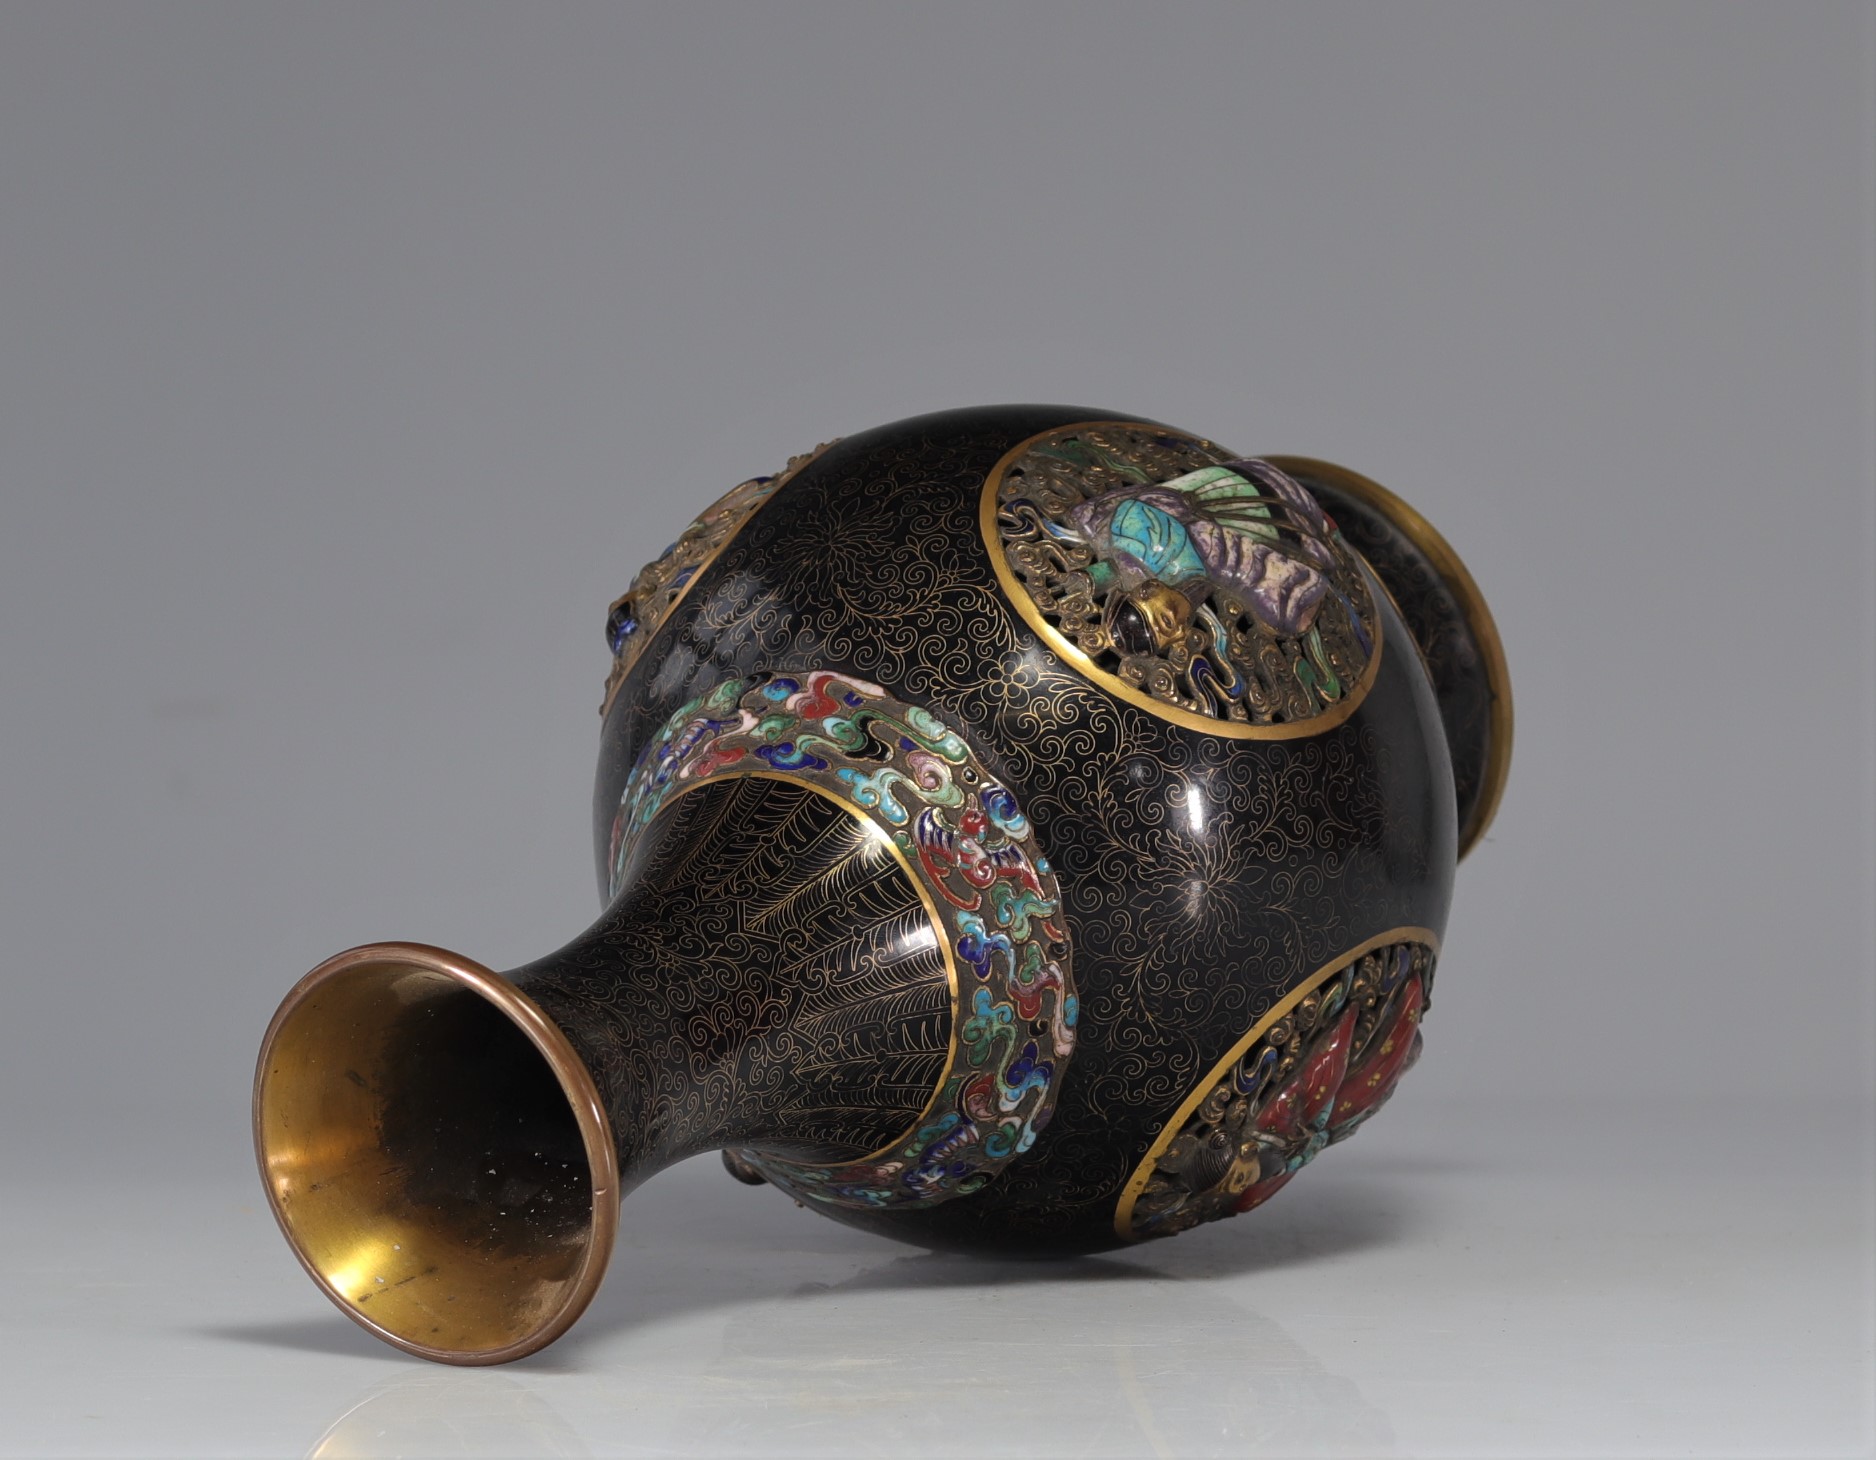 Cloisonne bronze vase decorated with Qing period figures - Image 3 of 9